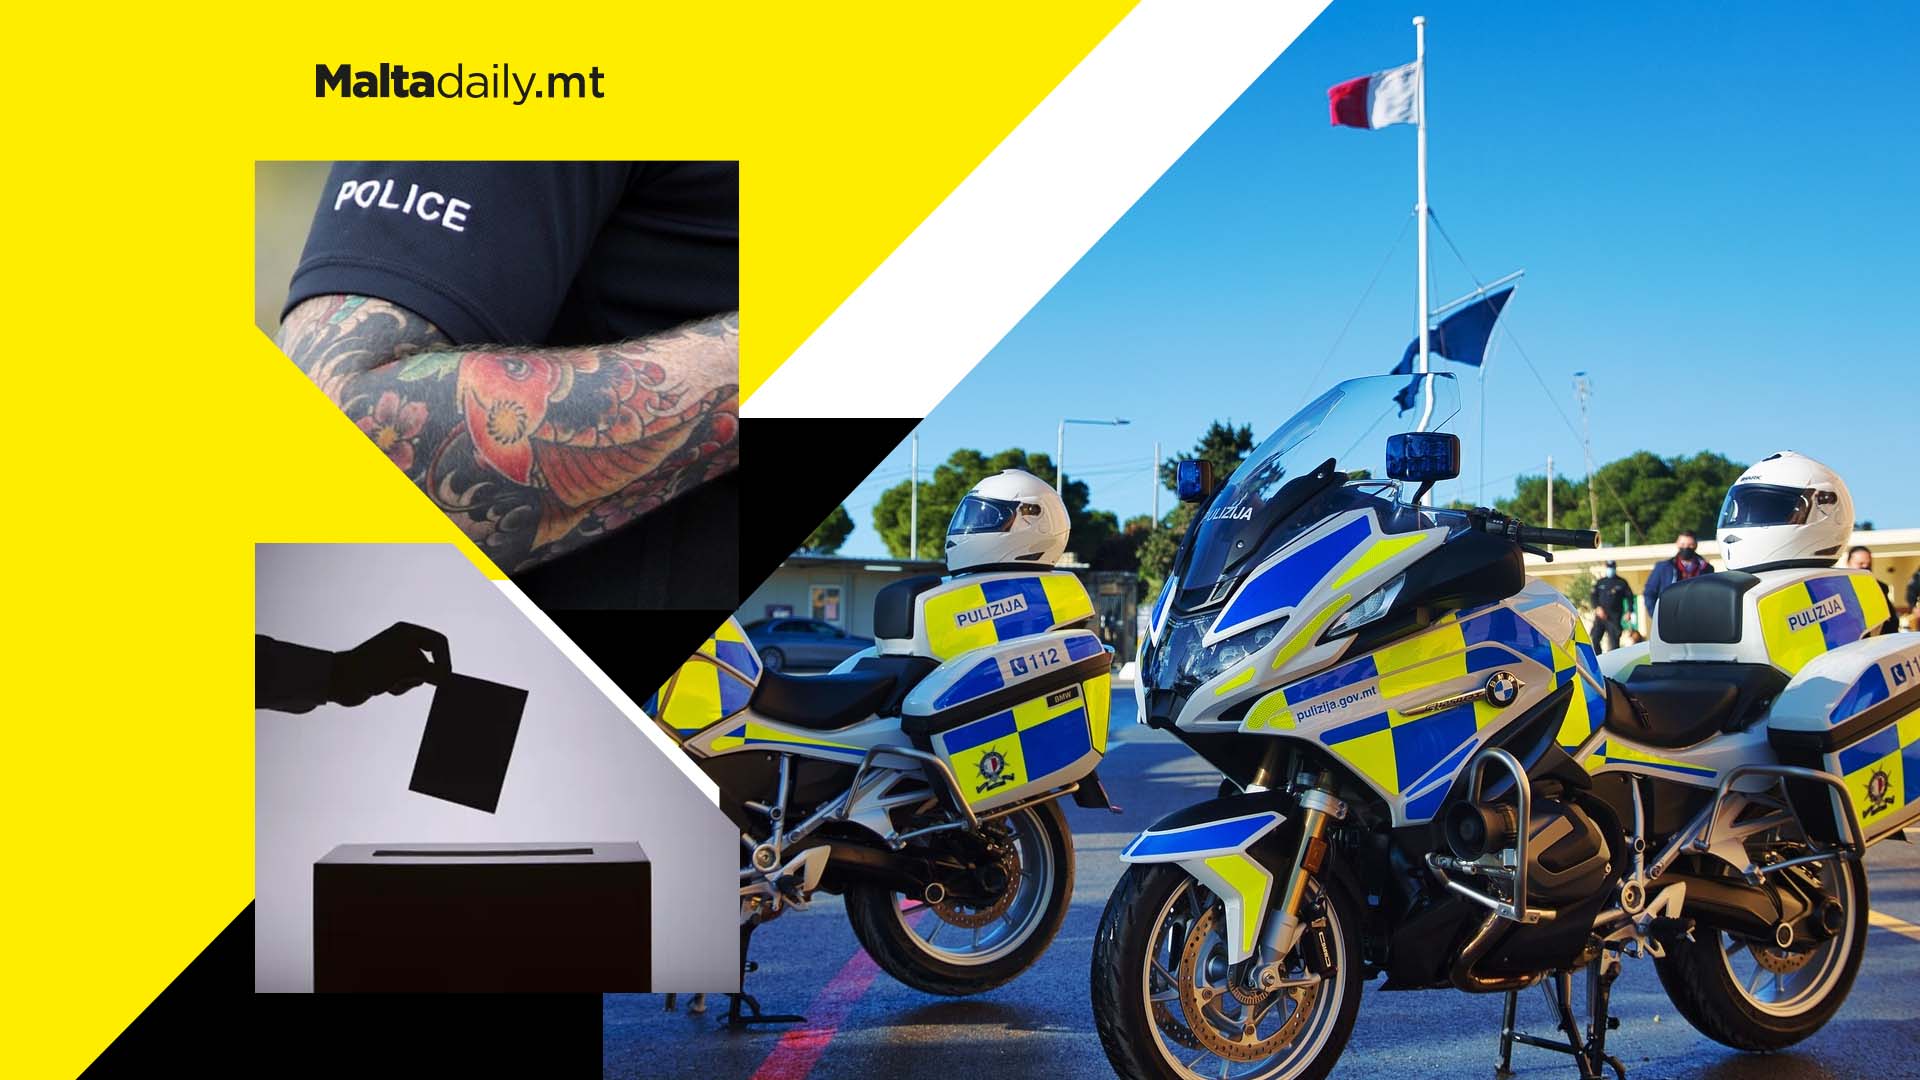 Tattoos and other proposals by Malta Police Union